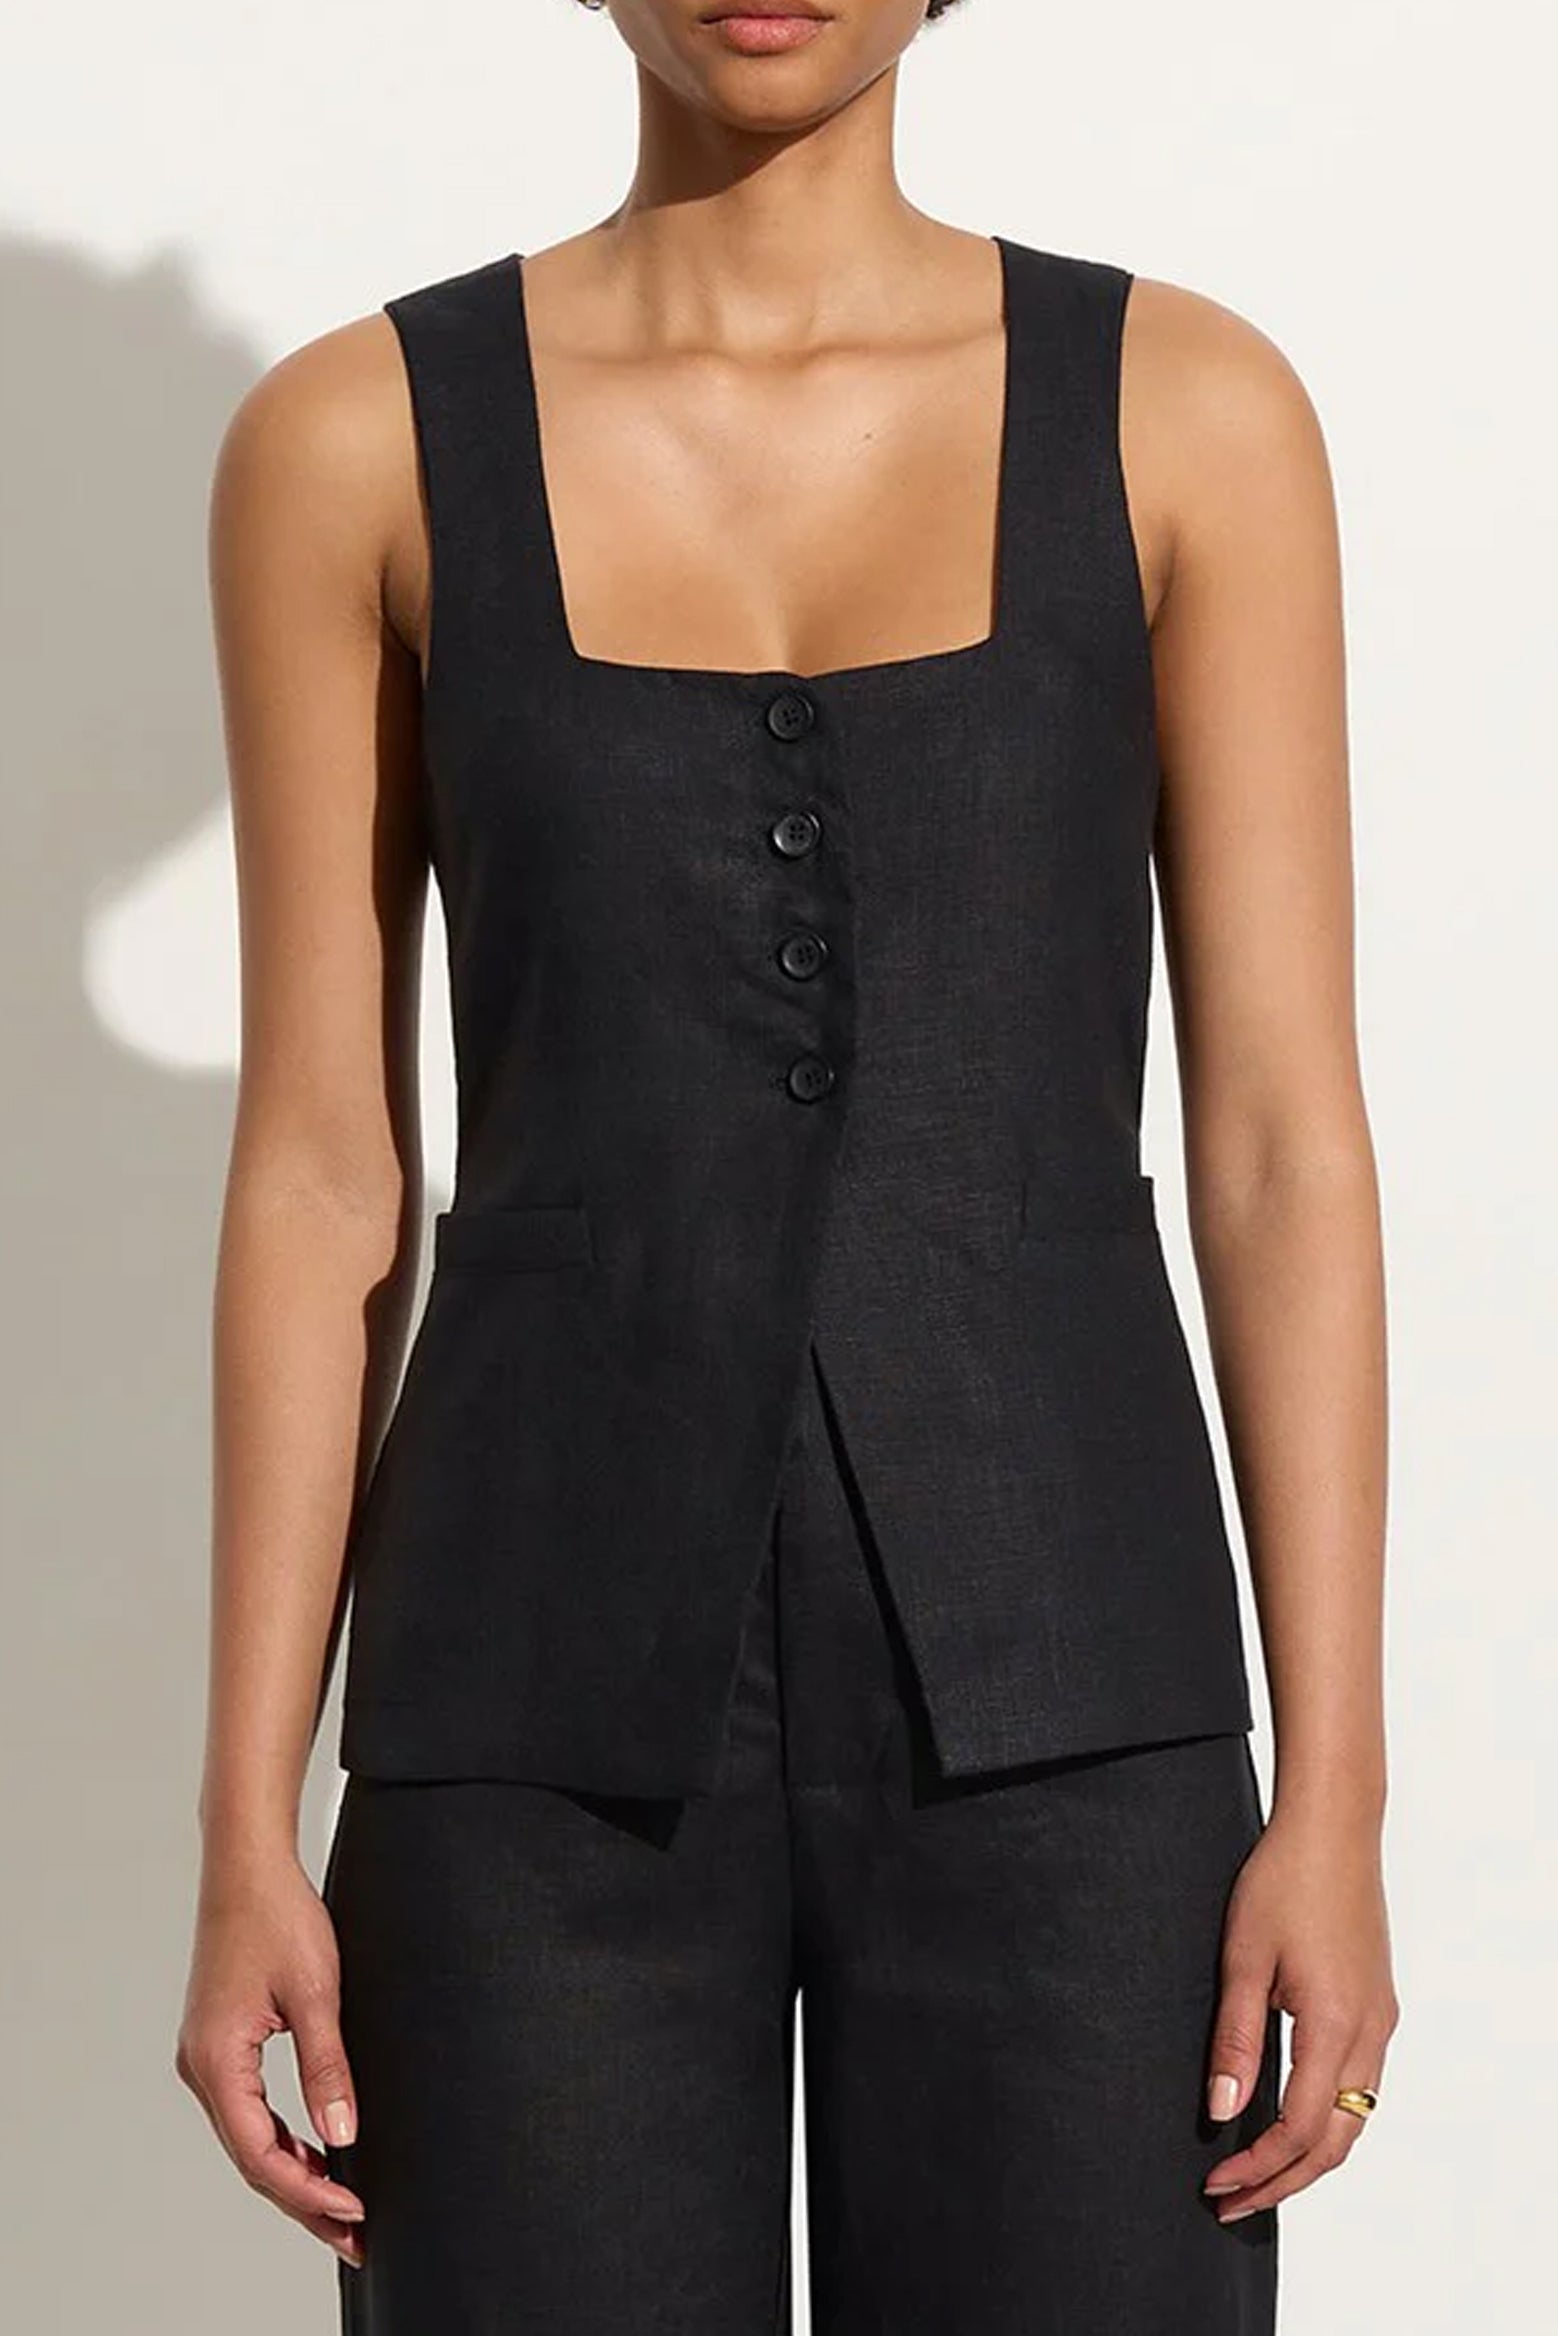 Faithfull The Brand Maya Vest in Black available at The New Trend Australia.